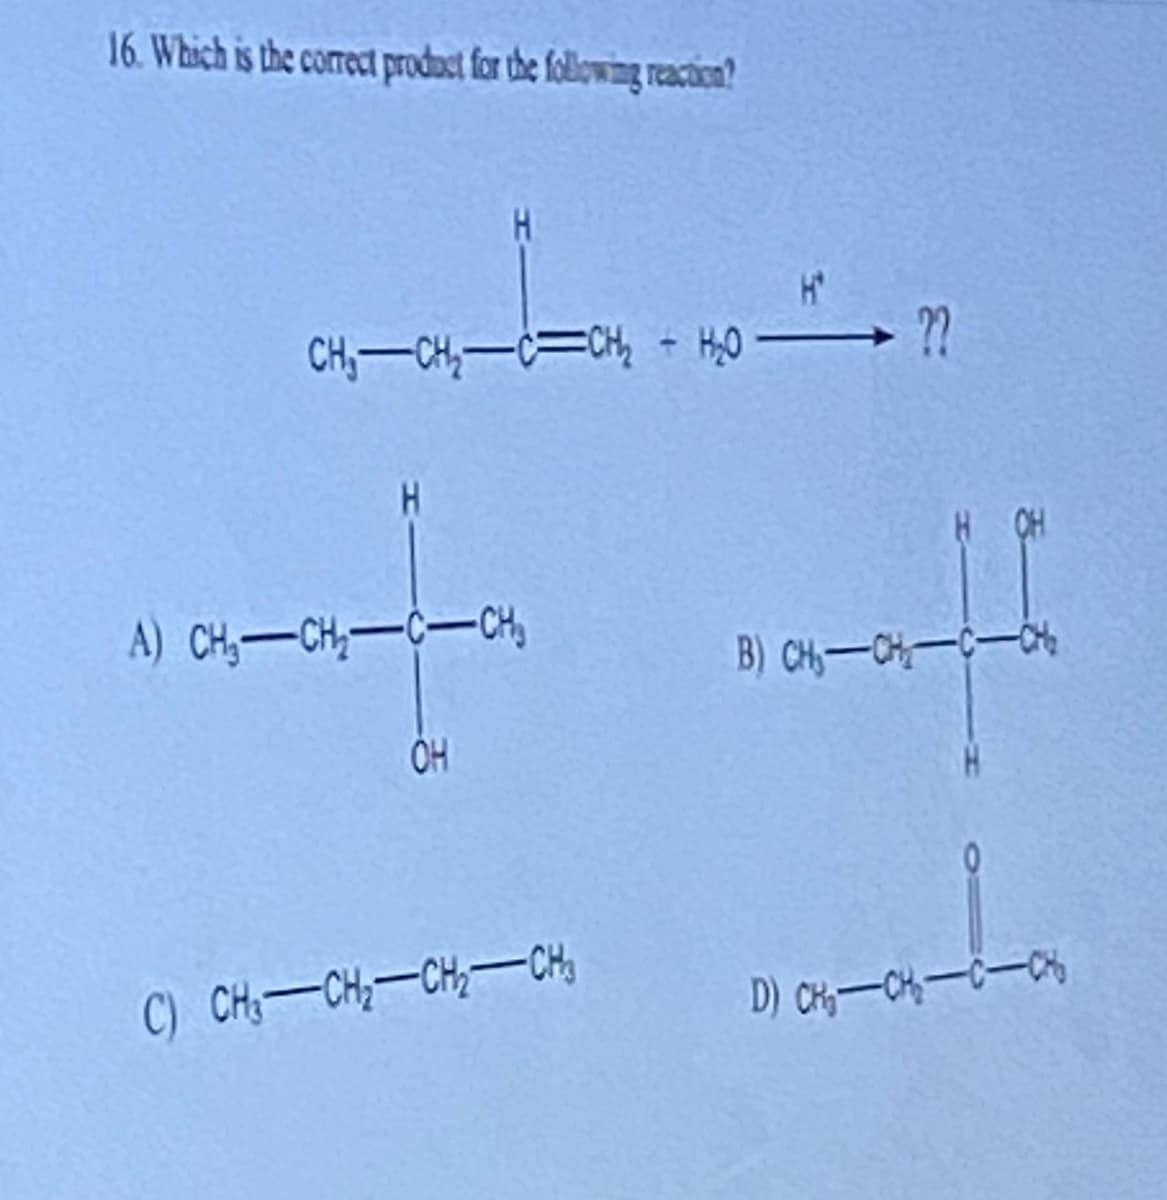 16. Which is the correct product for the following reaction?
CH₁ CH₂-C=CH₂ - H₂O
H
A) CH₂-CH₂-C-CH
OH
C) CHÍCH,CHCH
→ ??
H CH
B) CH₂-CH₂-C-CH₂
D) CH₂-CH₂-C-C